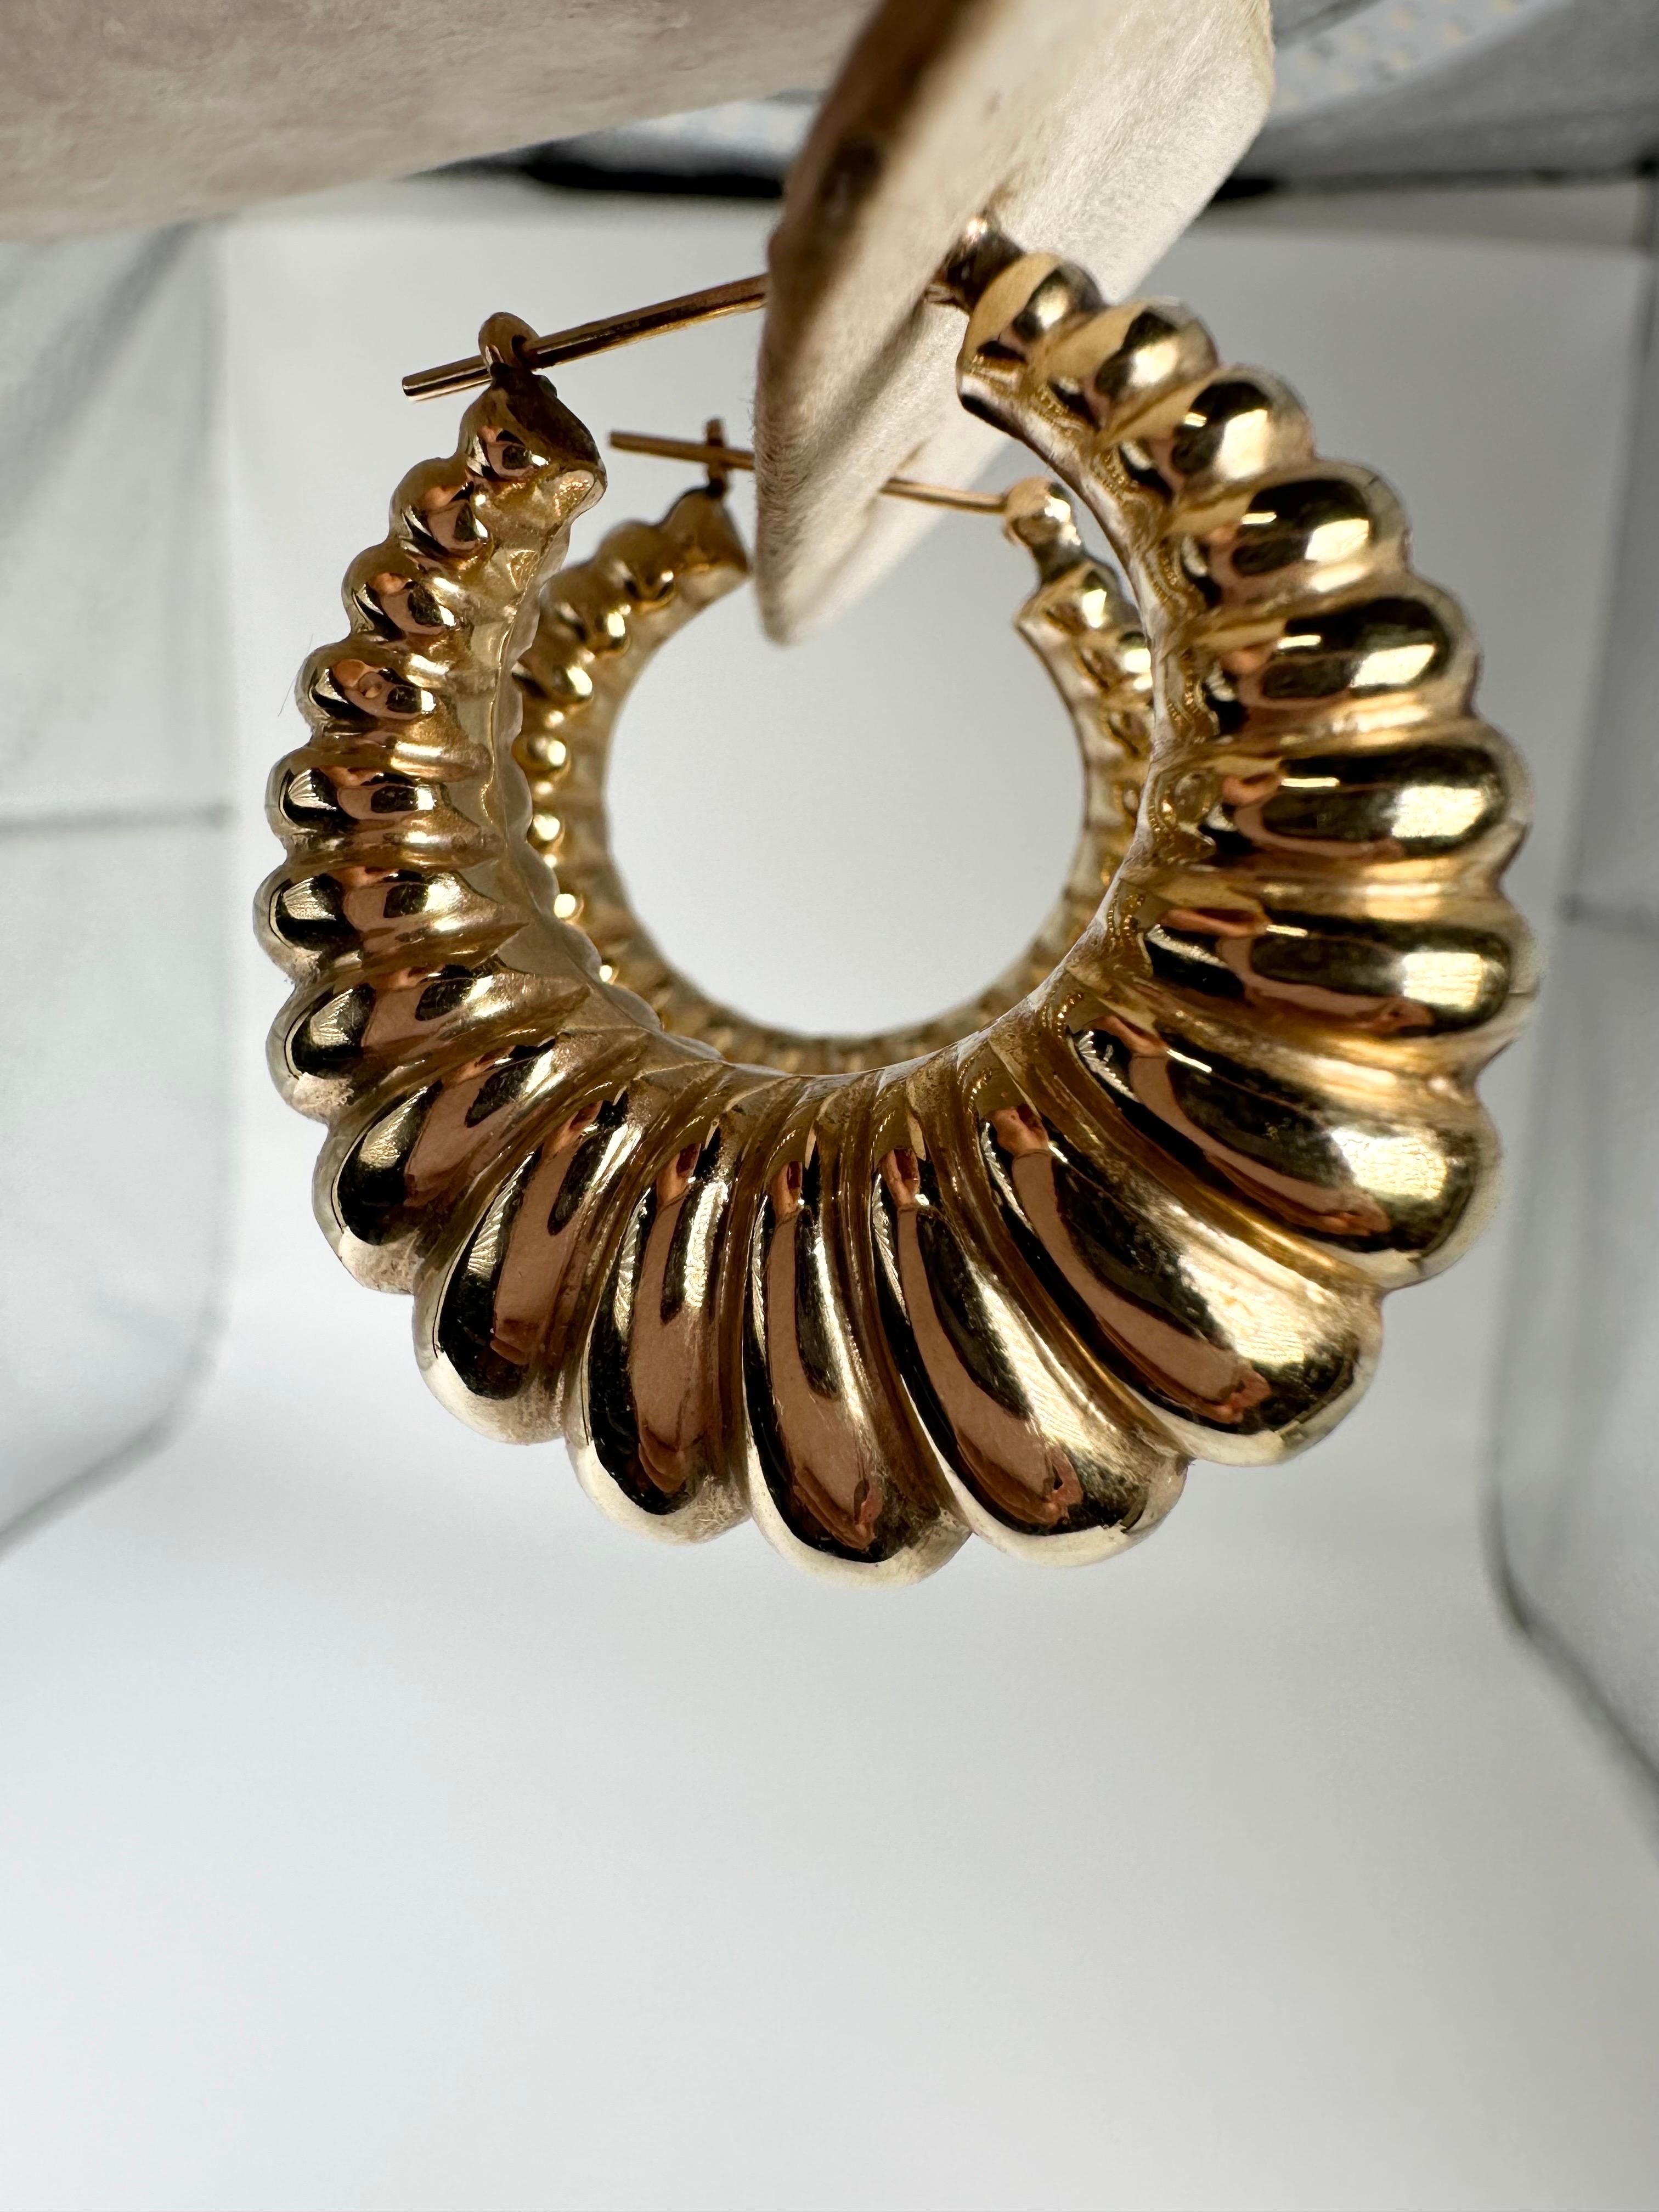 Textured large hoop earrings 14KT yellow gold 33mm diameter In New Condition For Sale In Jupiter, FL